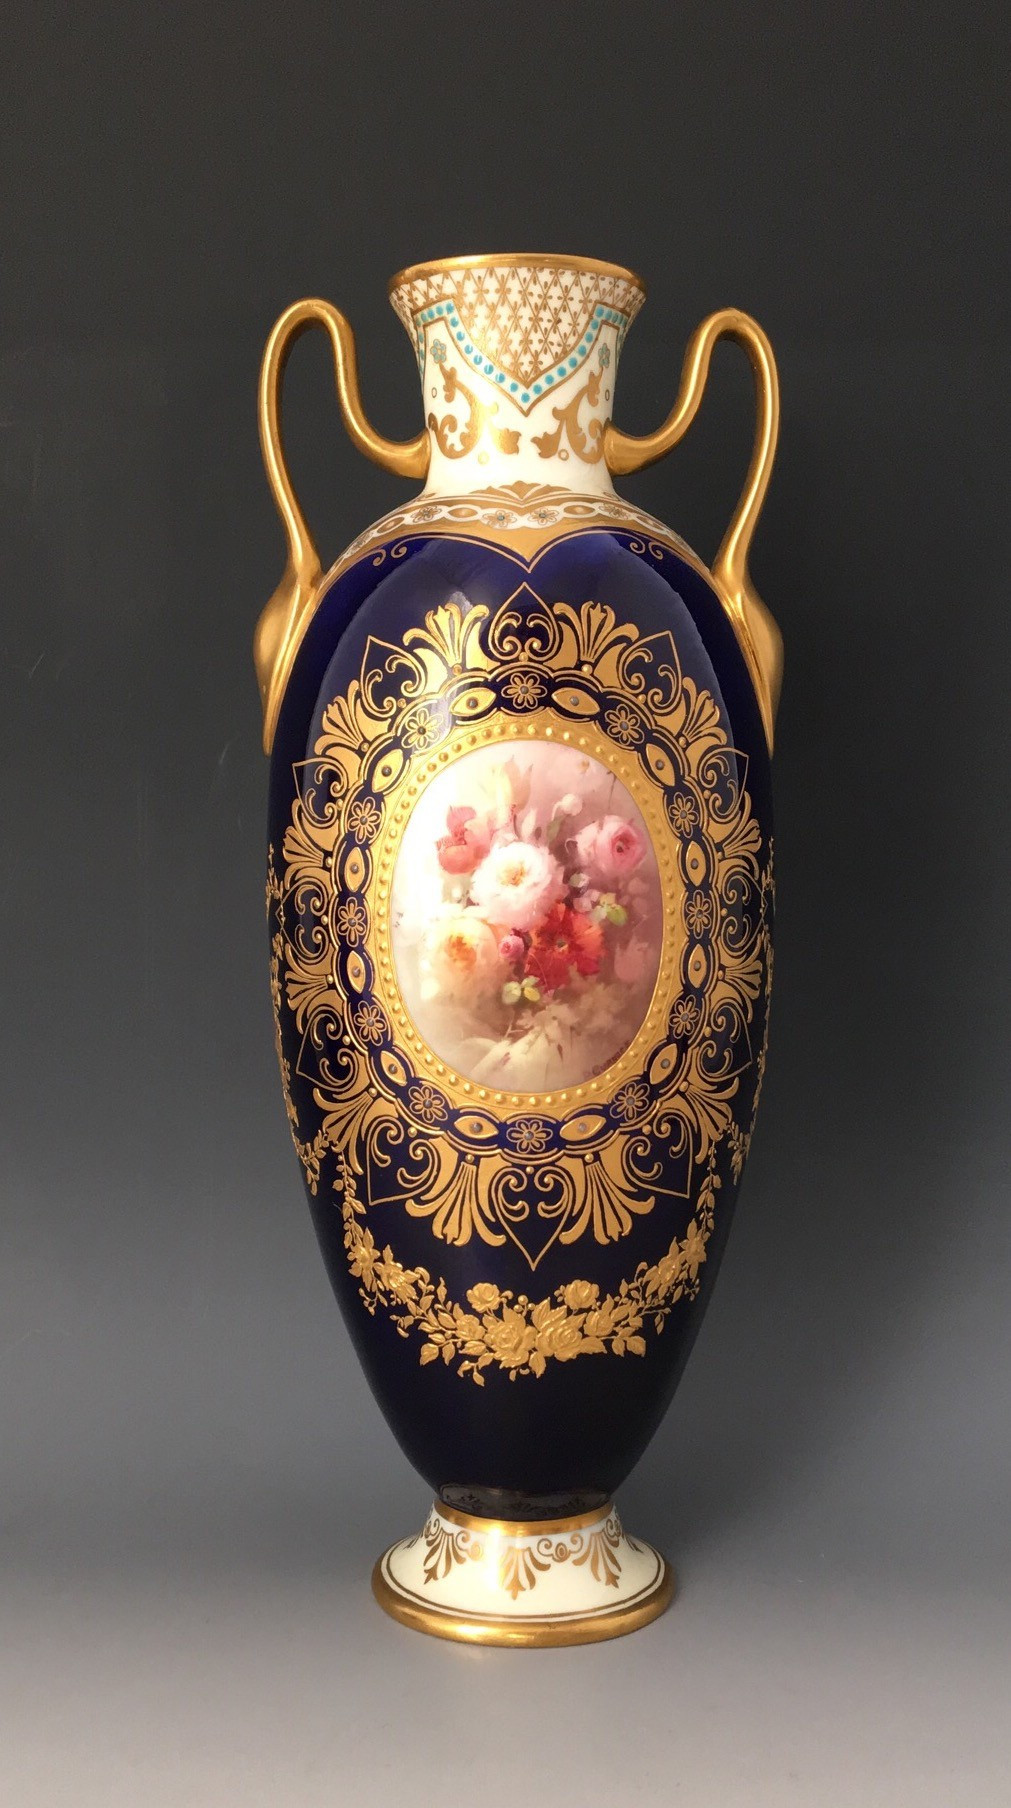 28 Awesome Doulton Burslem Vase 2024 free download doulton burslem vase of doulton burslem porcelain vase painted by percy curnock philip pertaining to doulton burslem porcelain vase painted by percy curnock philip carrol antiques